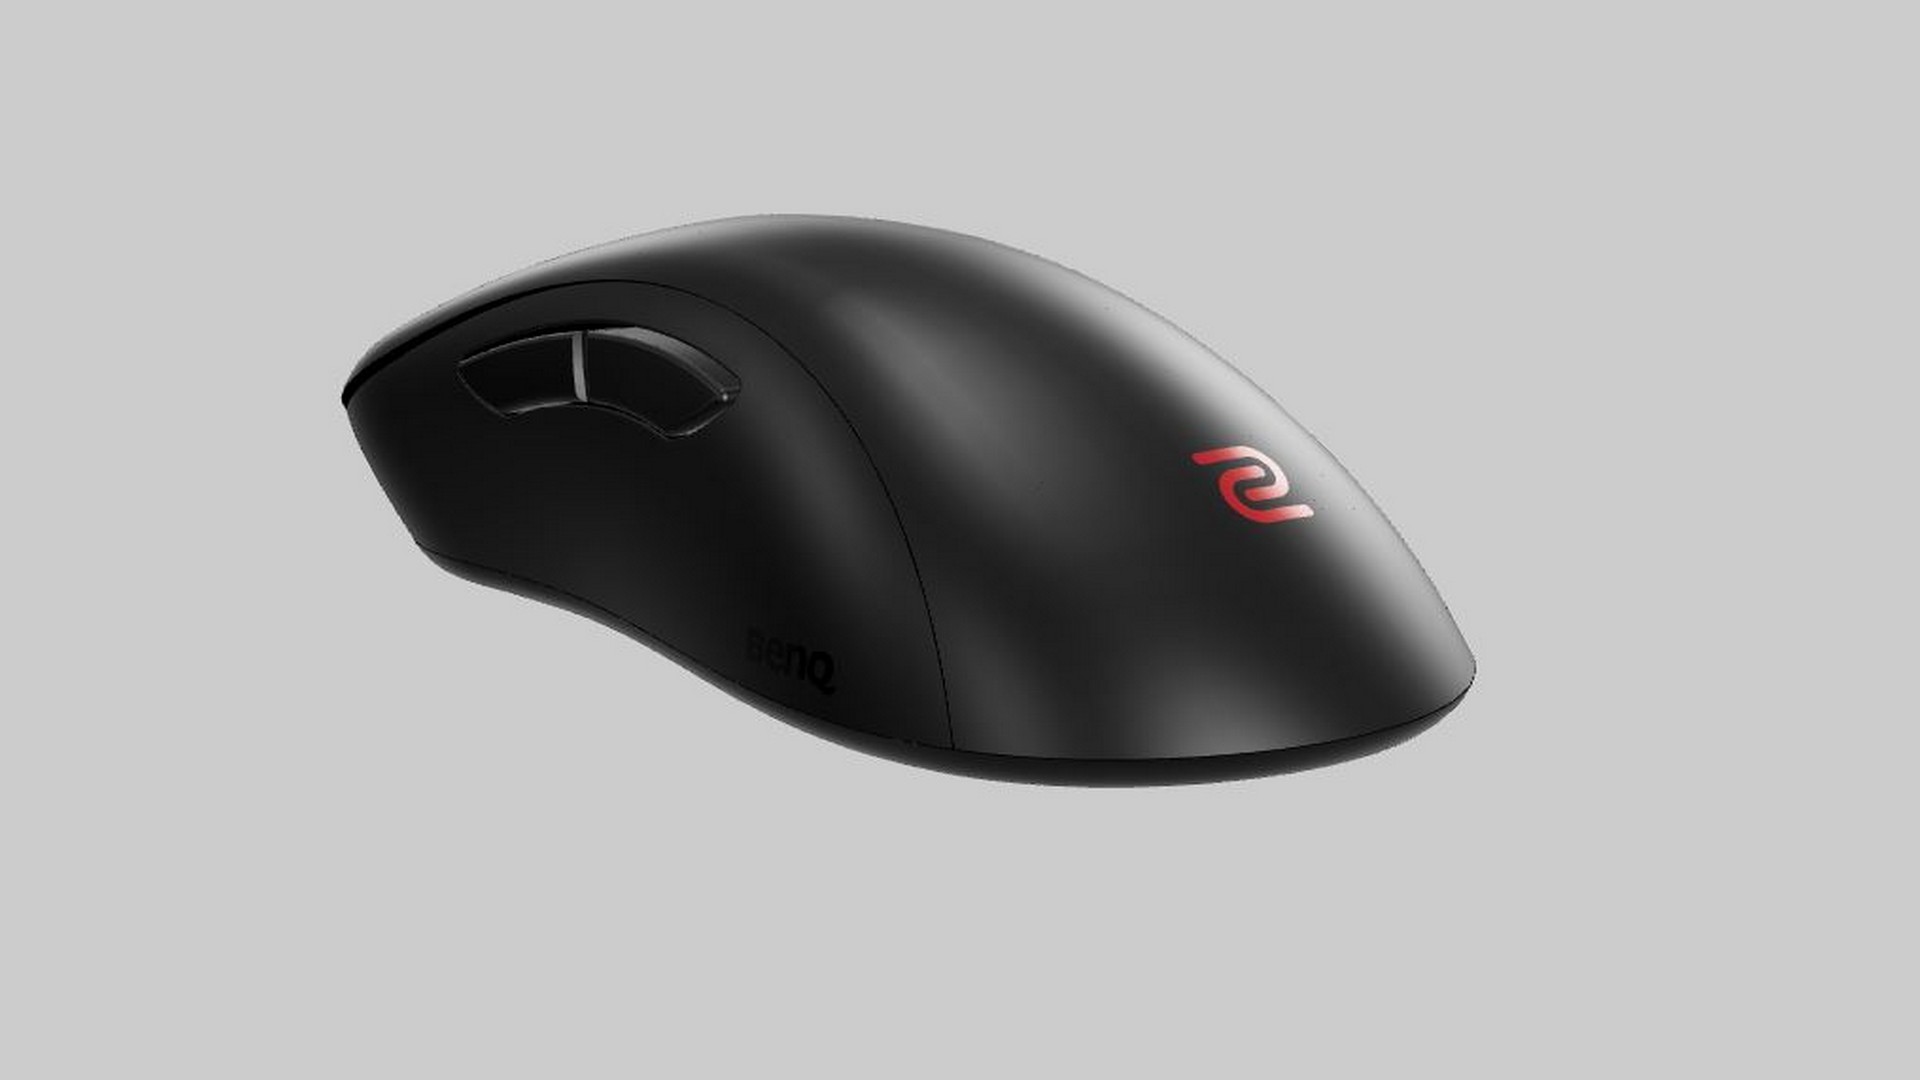 BenQ ZOWIE Announces EC3-C – A New Mouse Size and Shape along with the New C Series Version Mice Lineup, and G-SR-SE Rouge